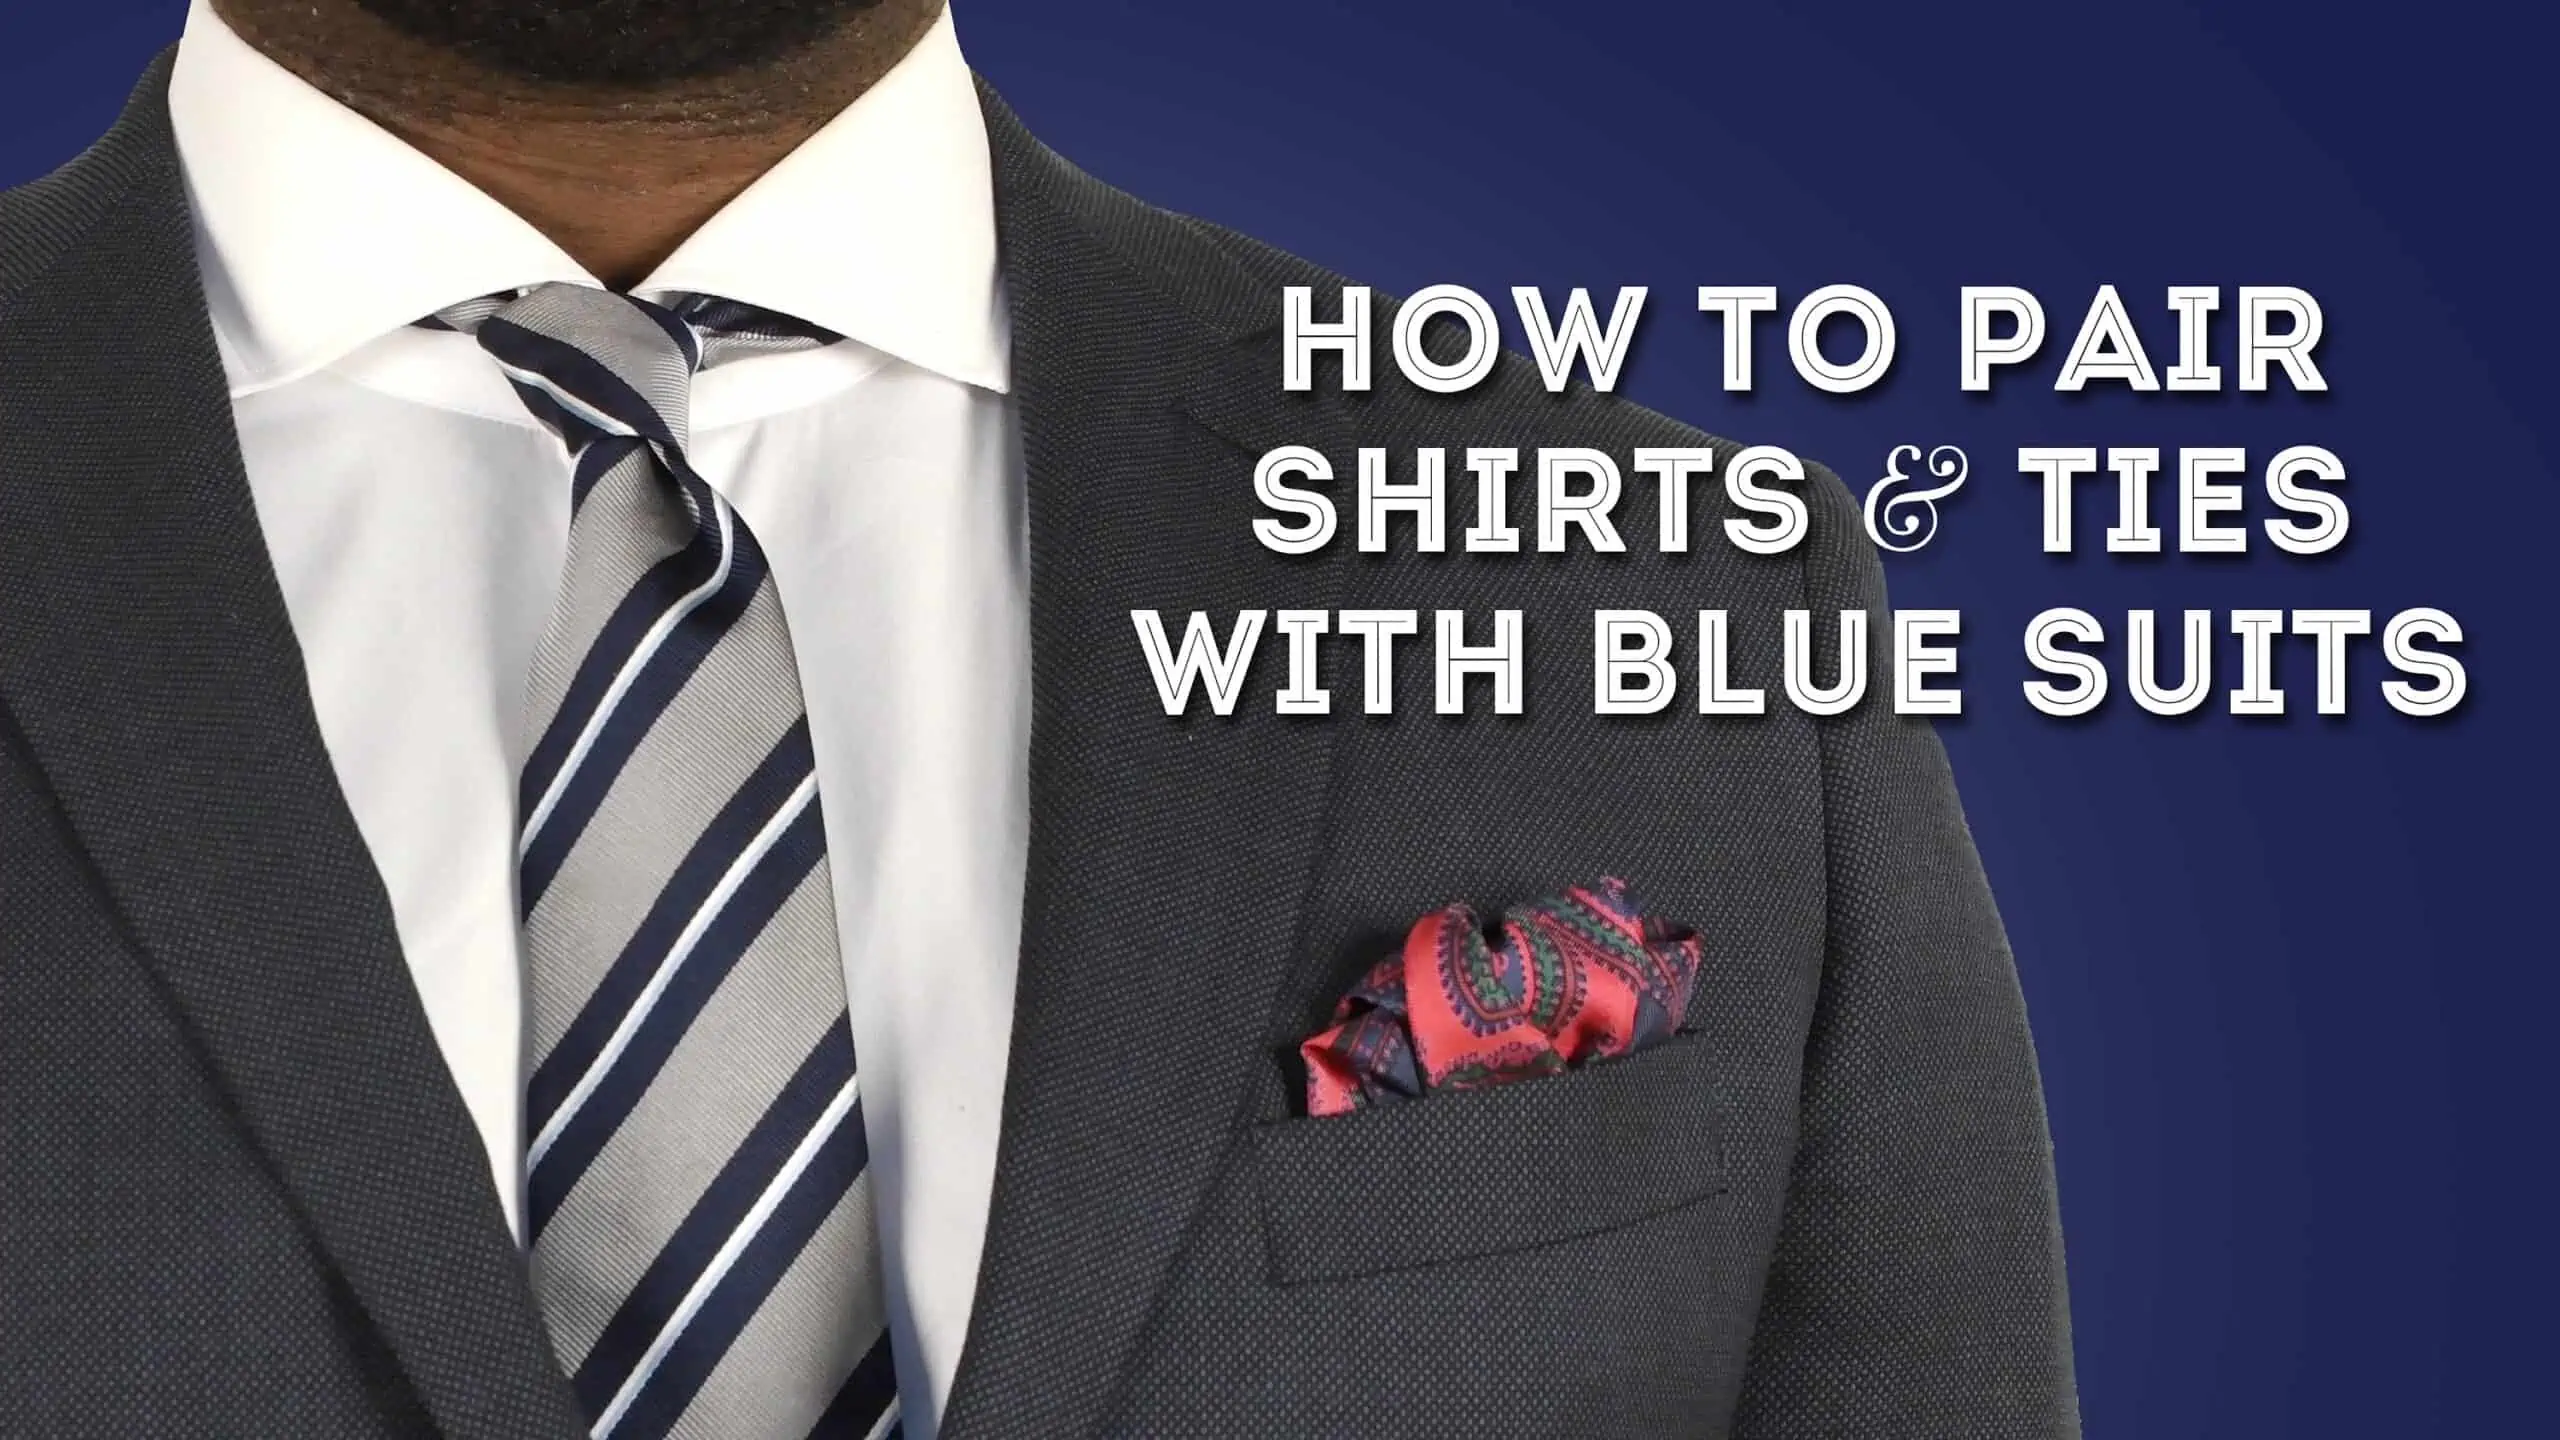 How To Pair Shirts & Ties With Blue Suits - Smart Menswear